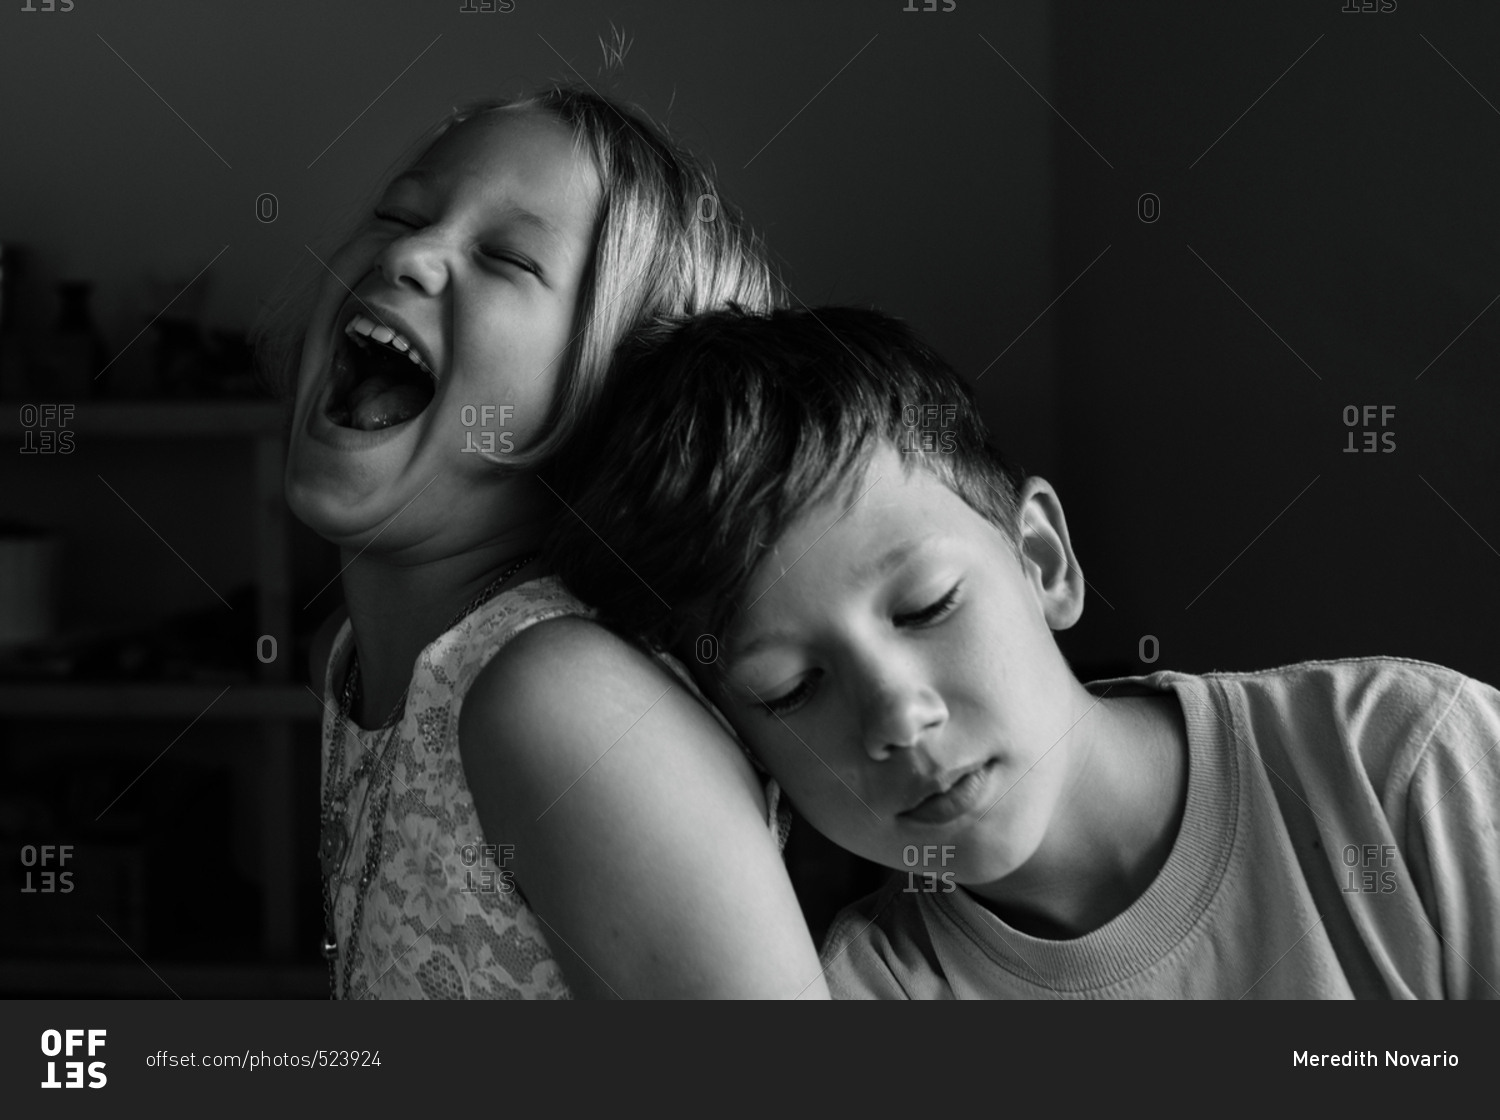 Portrait of two siblings, sister laughing and brother not amused